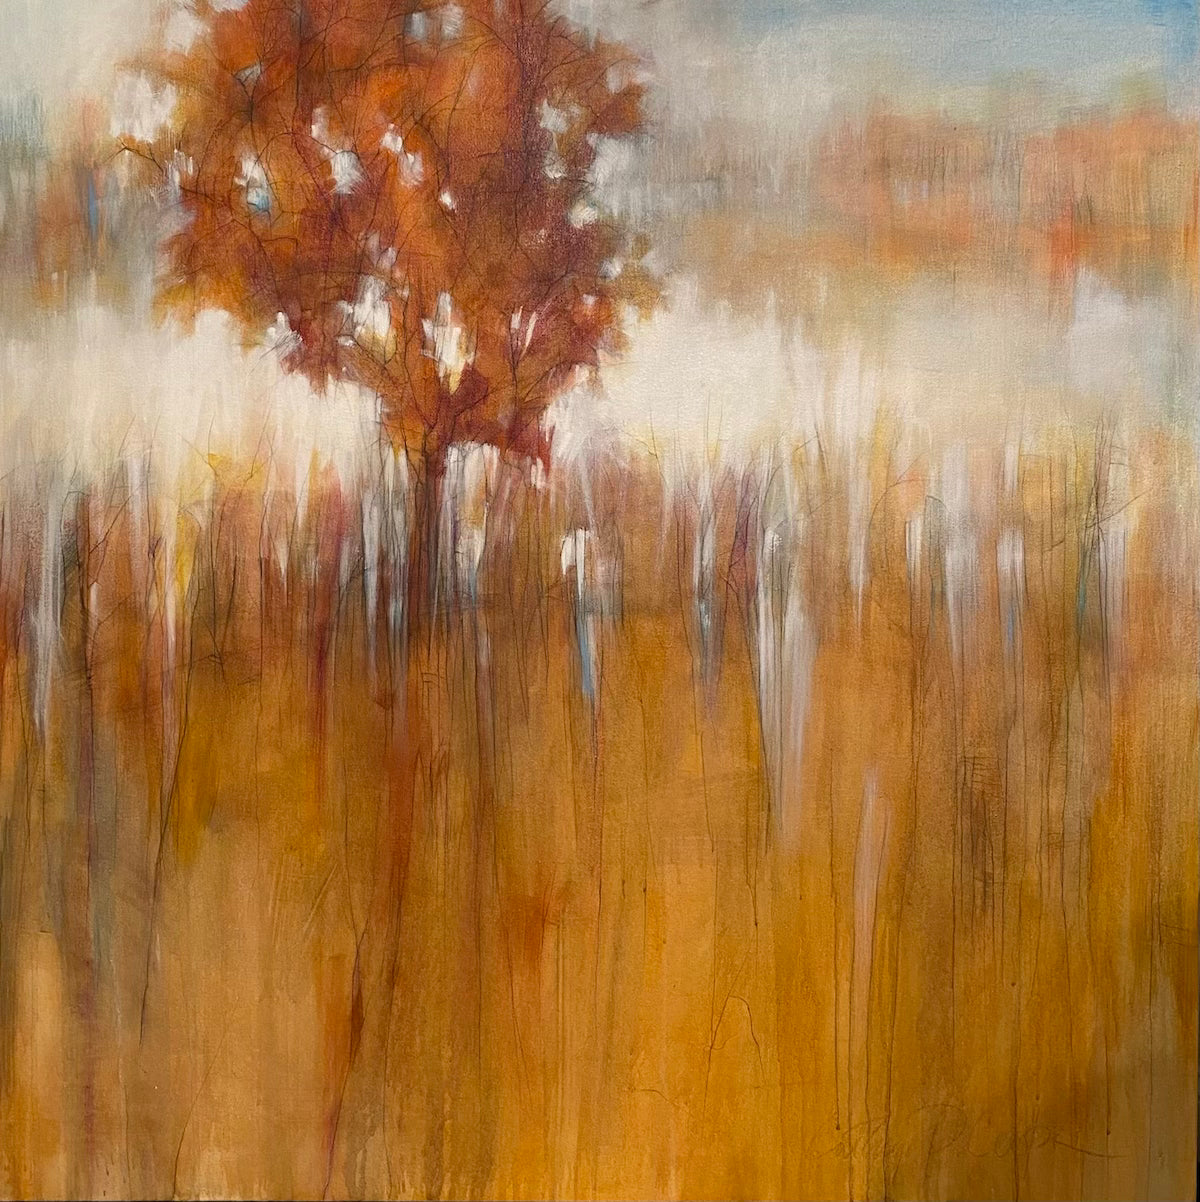 GOLDEN TREE- Original Acrylic and Graphite Painting on Canvas